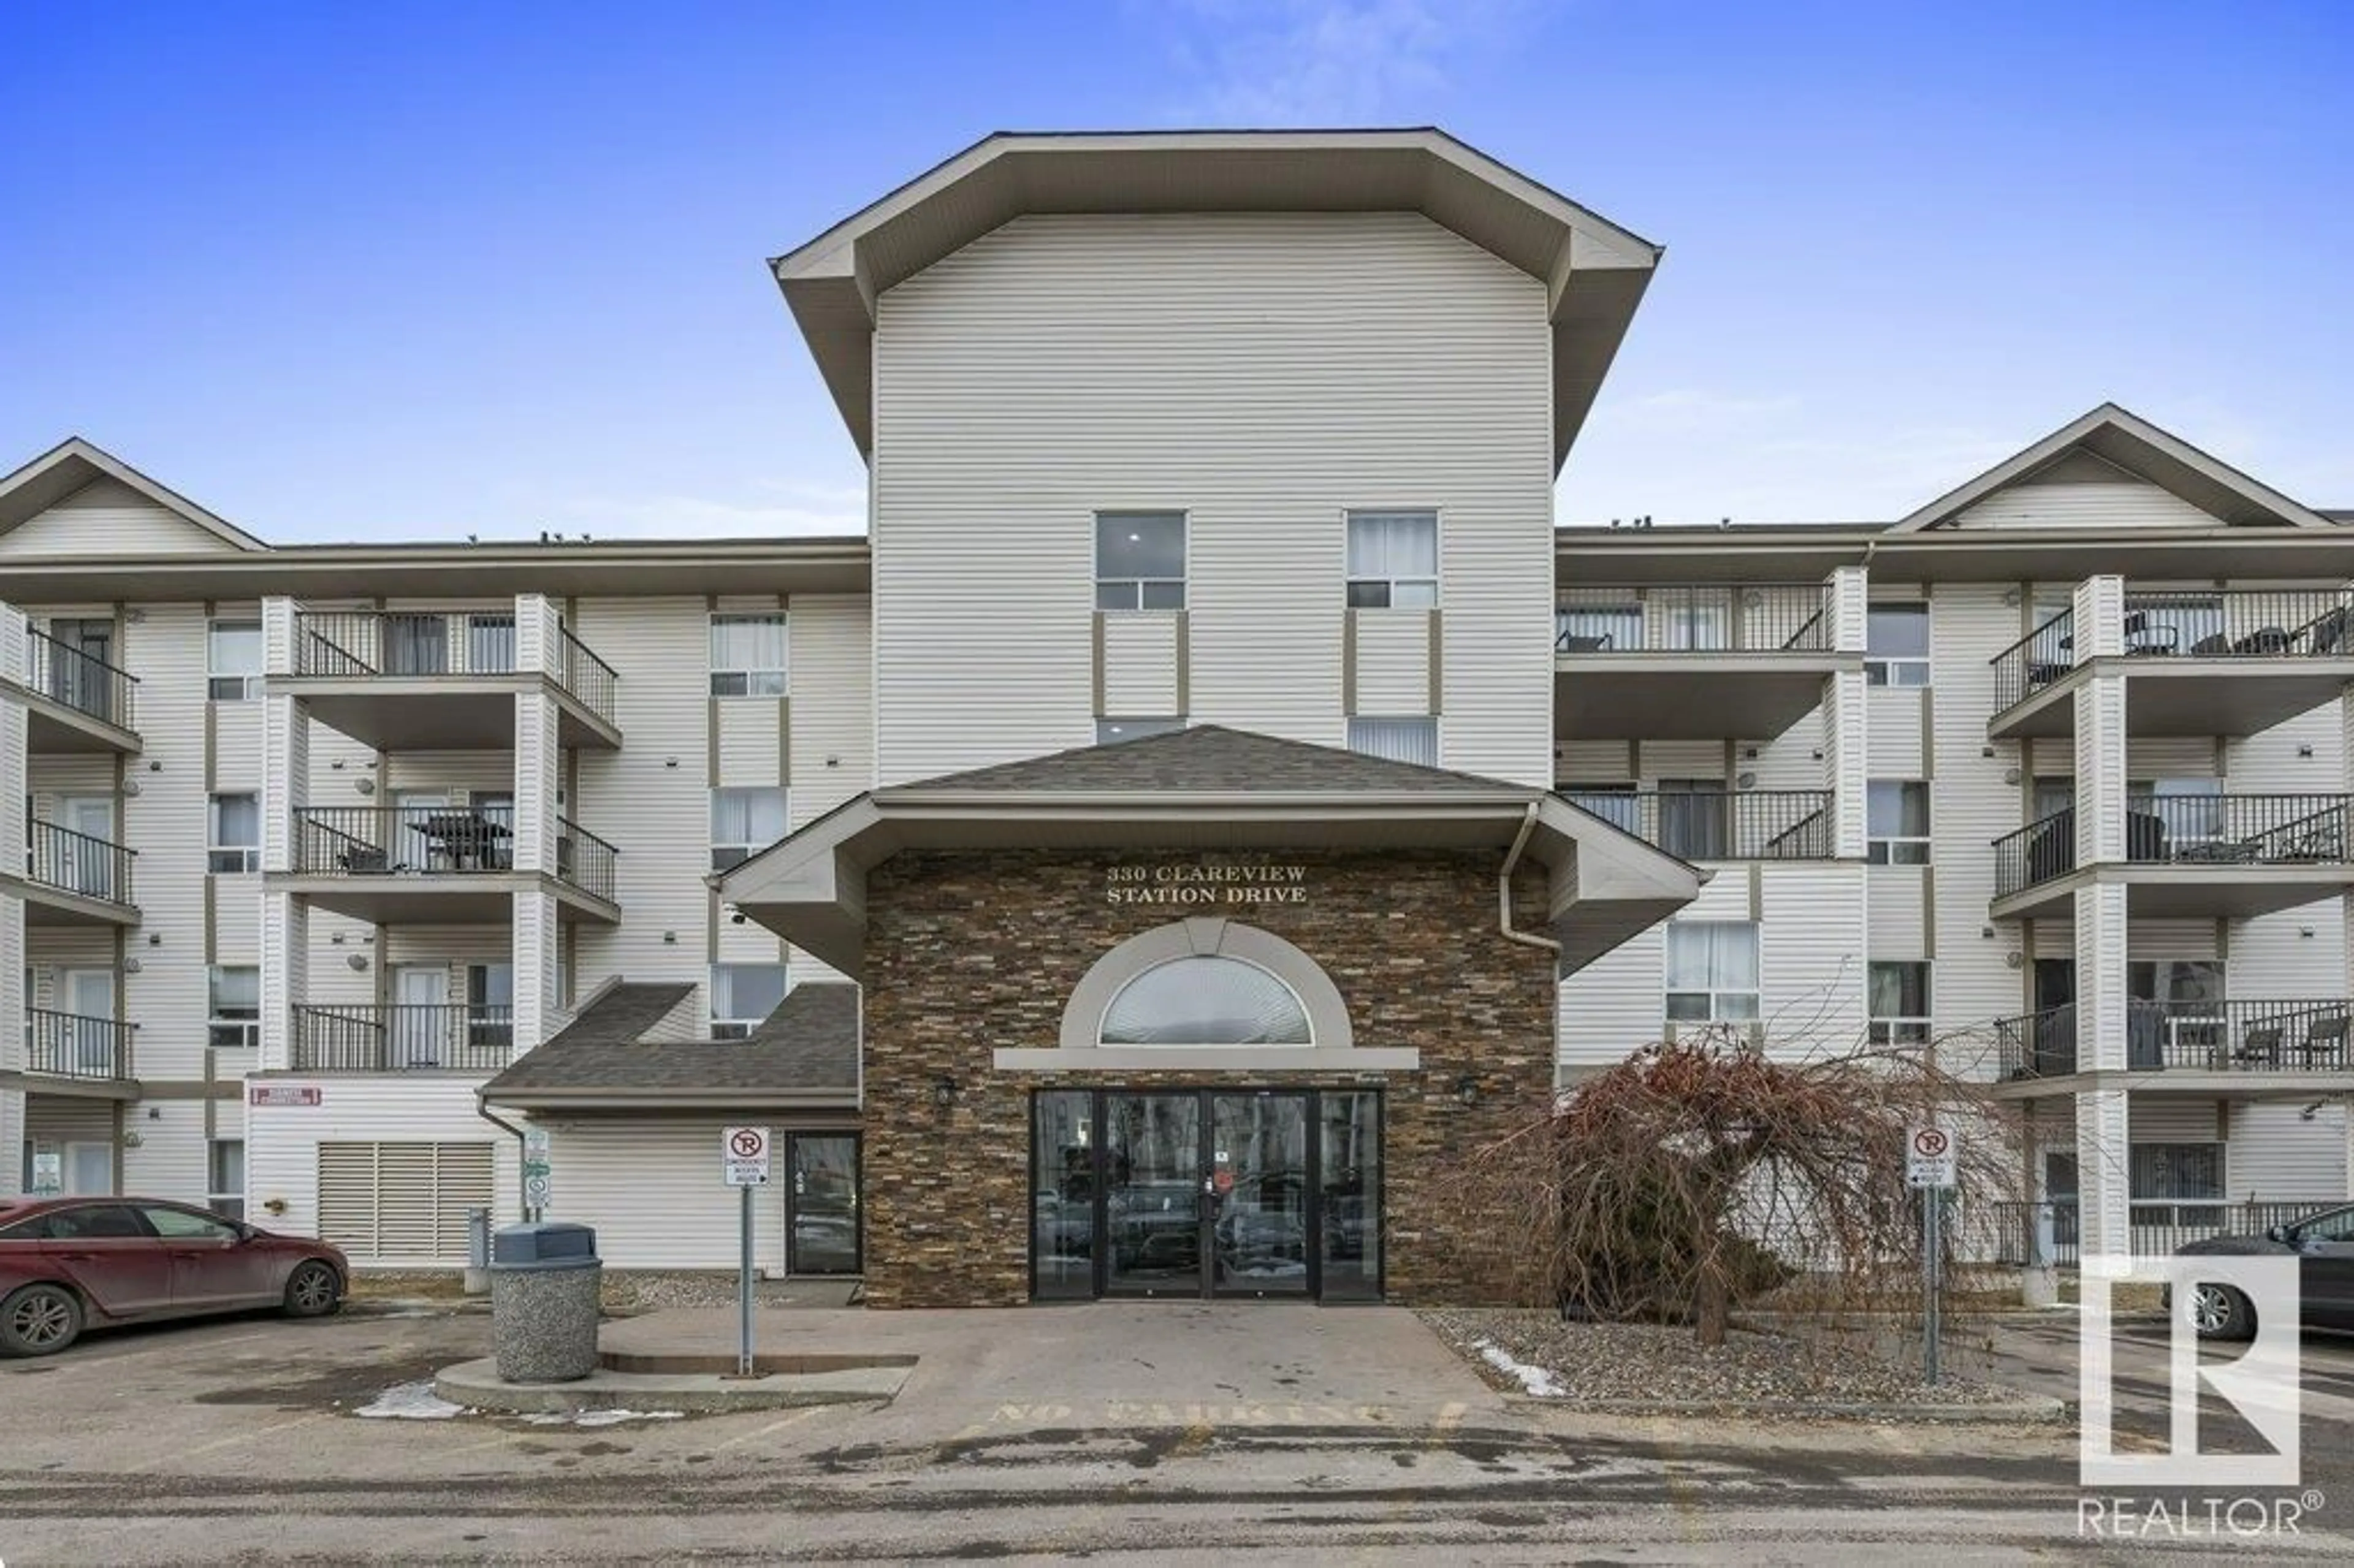 A pic from exterior of the house or condo for #1214 330 CLAREVIEW STATION DR NW, Edmonton Alberta T5Y0E6